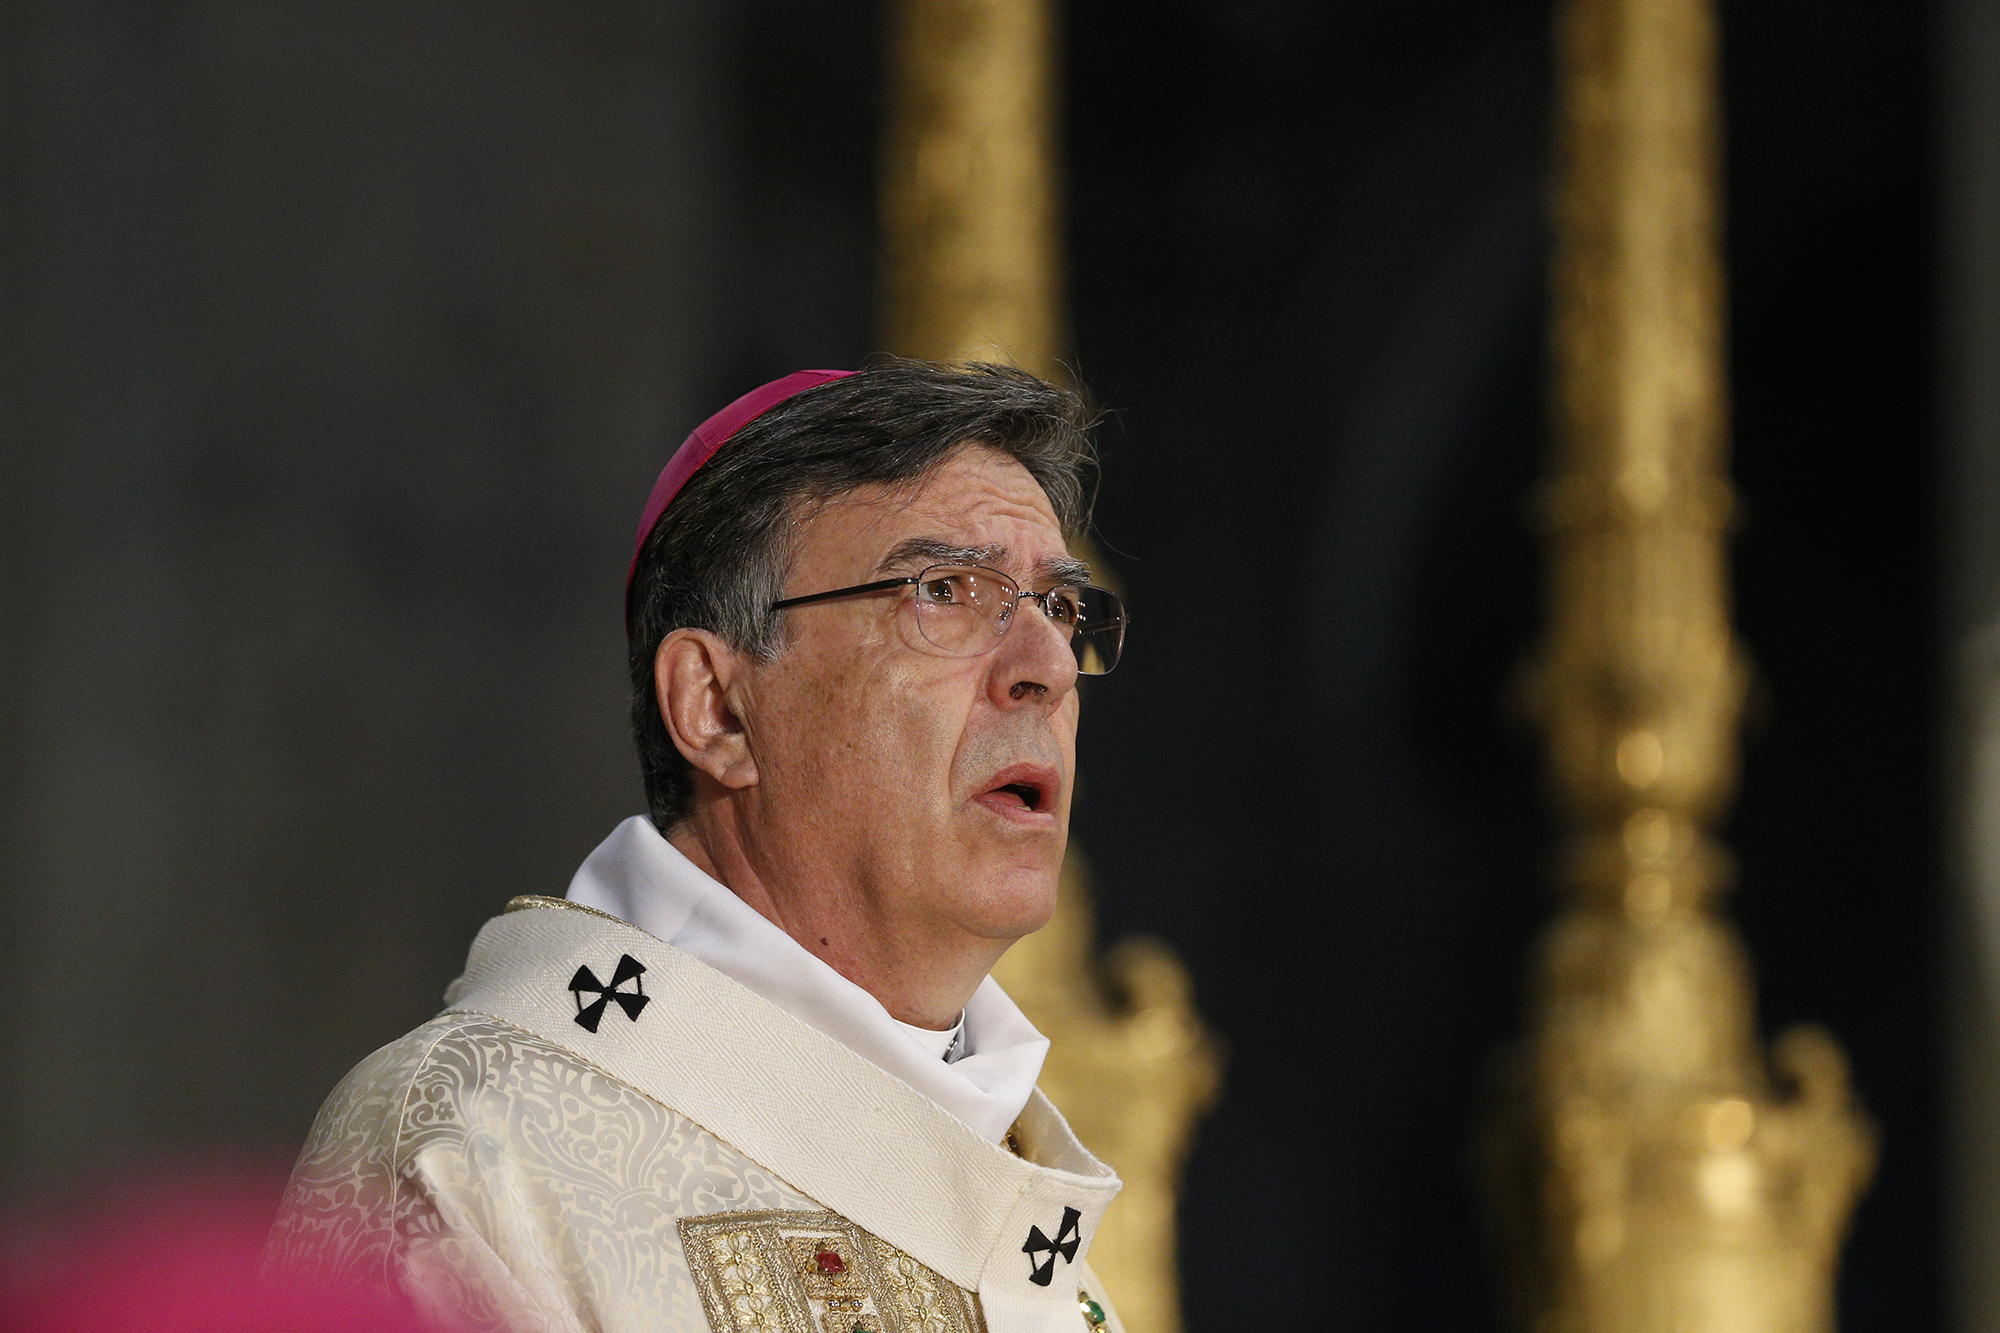 Paris archdiocese agrees to report all credible abuse accusations